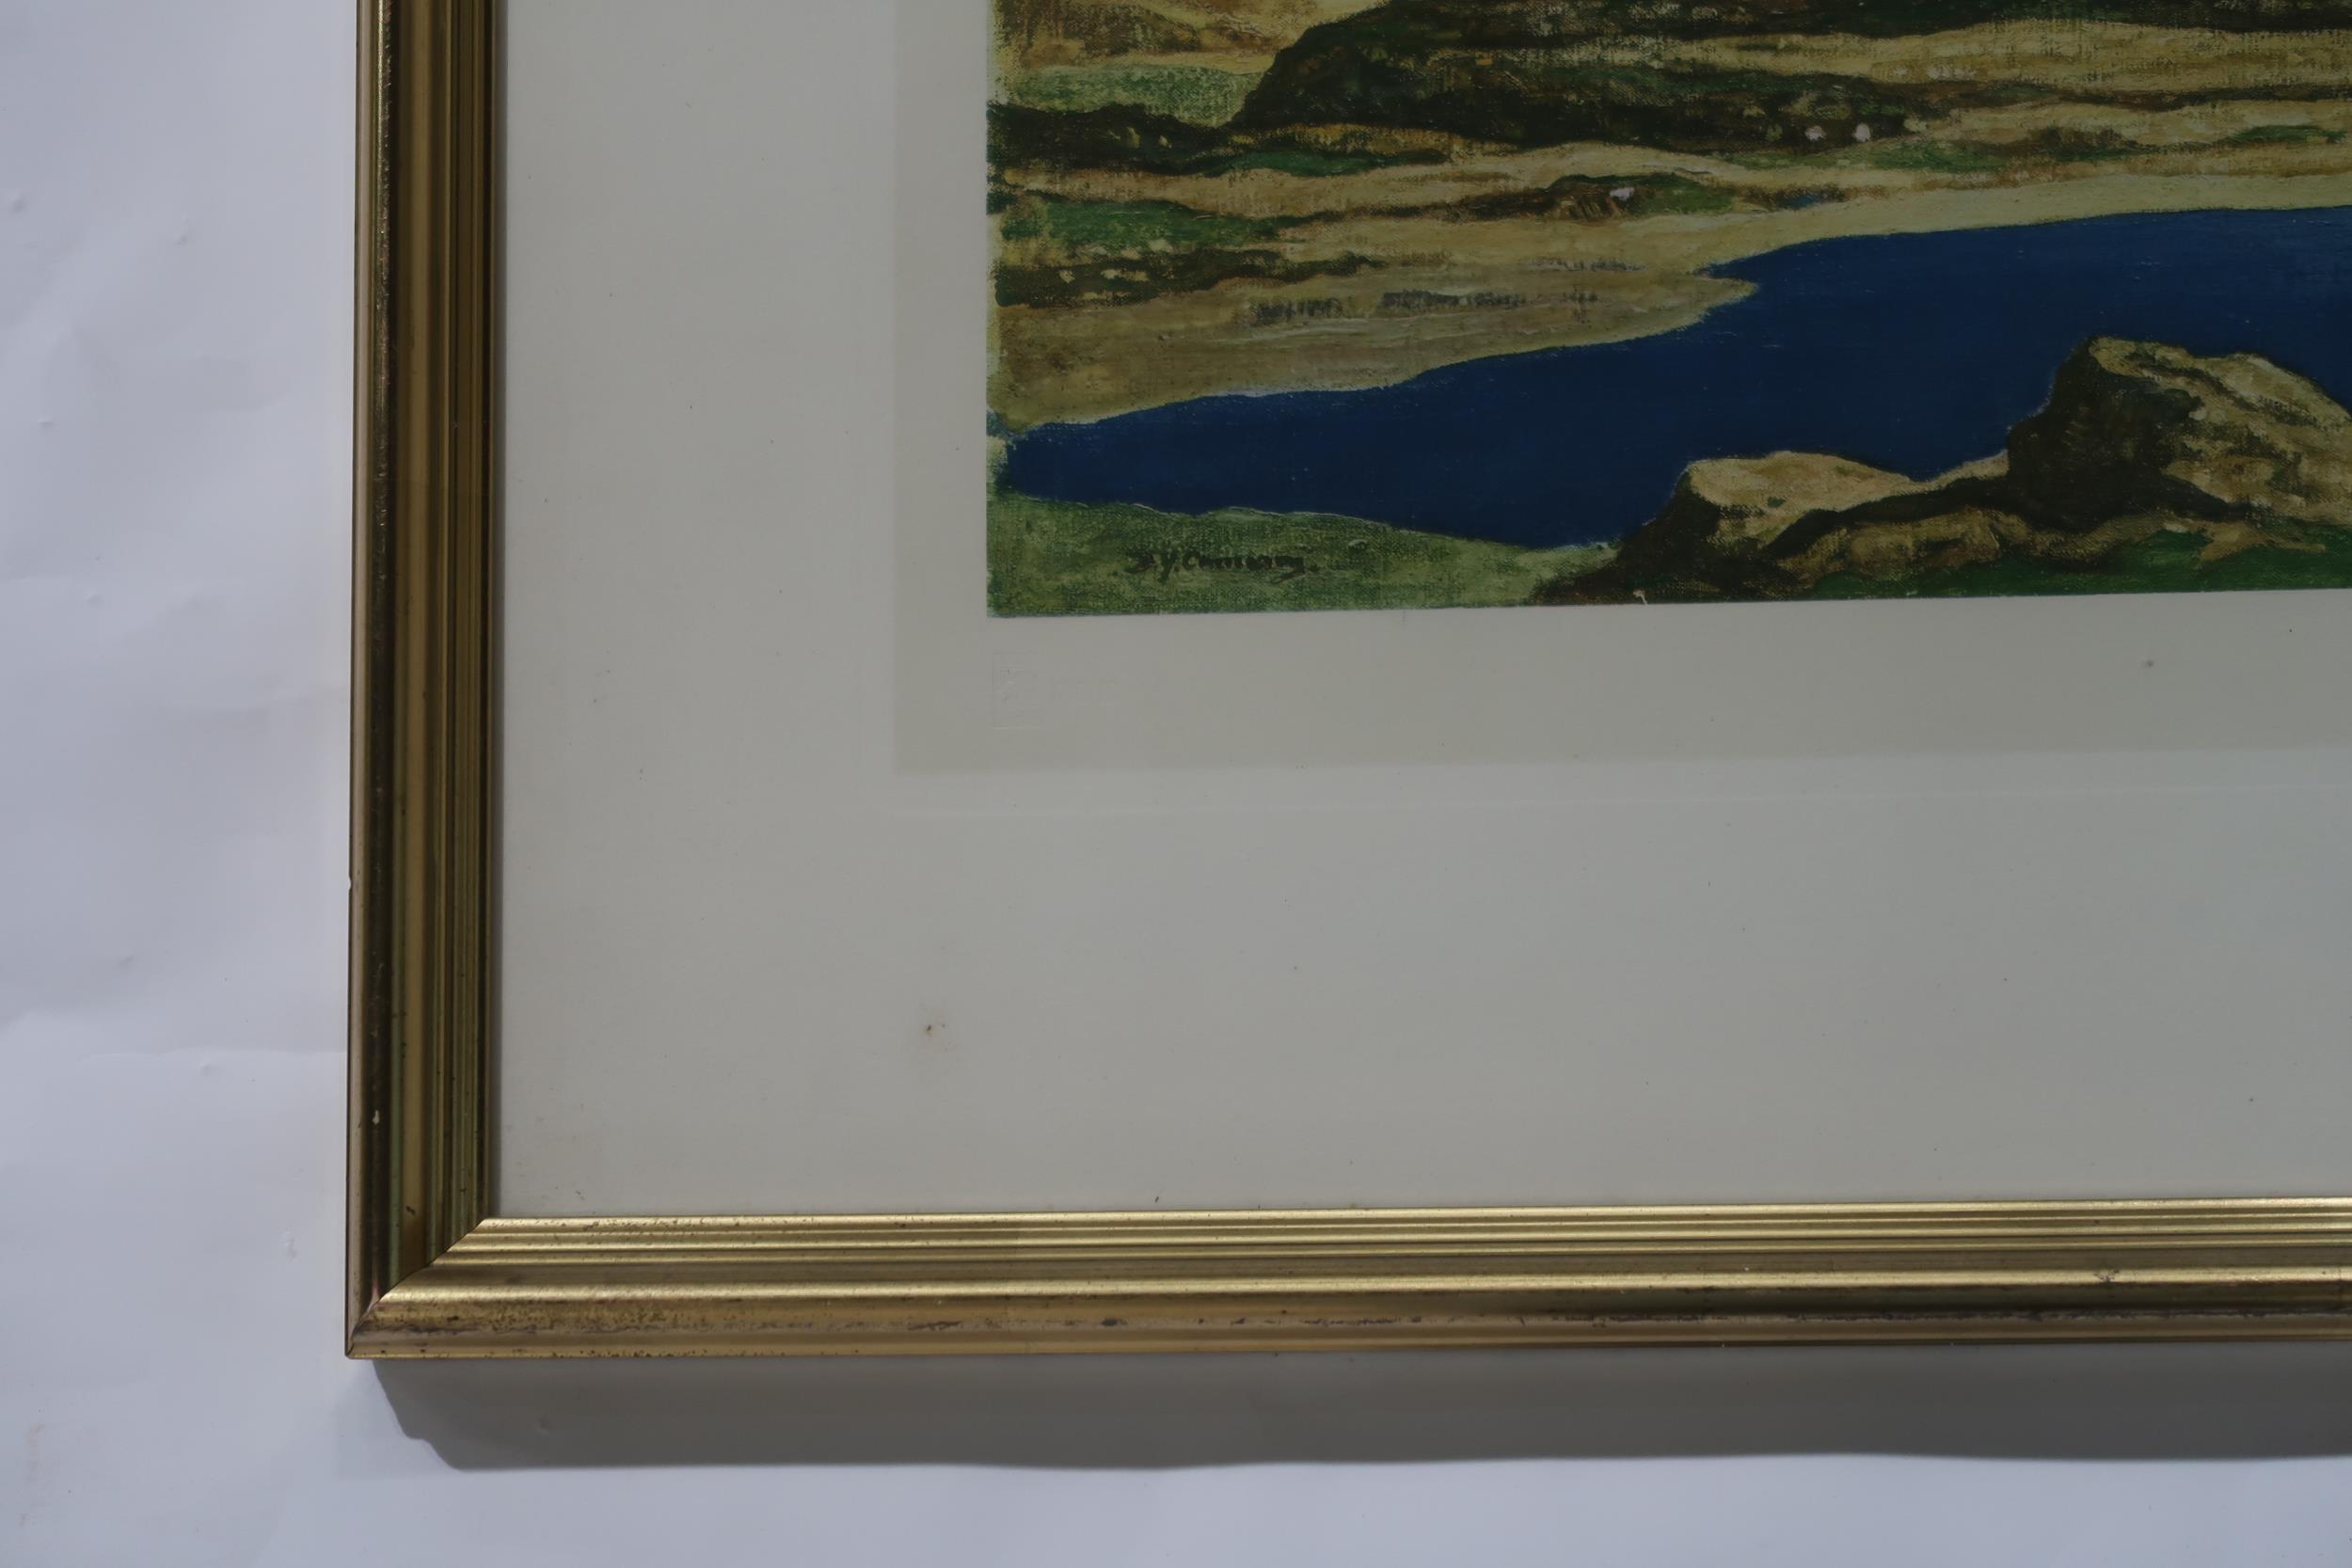 SIR DAVID YOUNG CAMERON Landscape, signed, print, 38 x 52cm Condition Report:Available upon request - Image 3 of 4